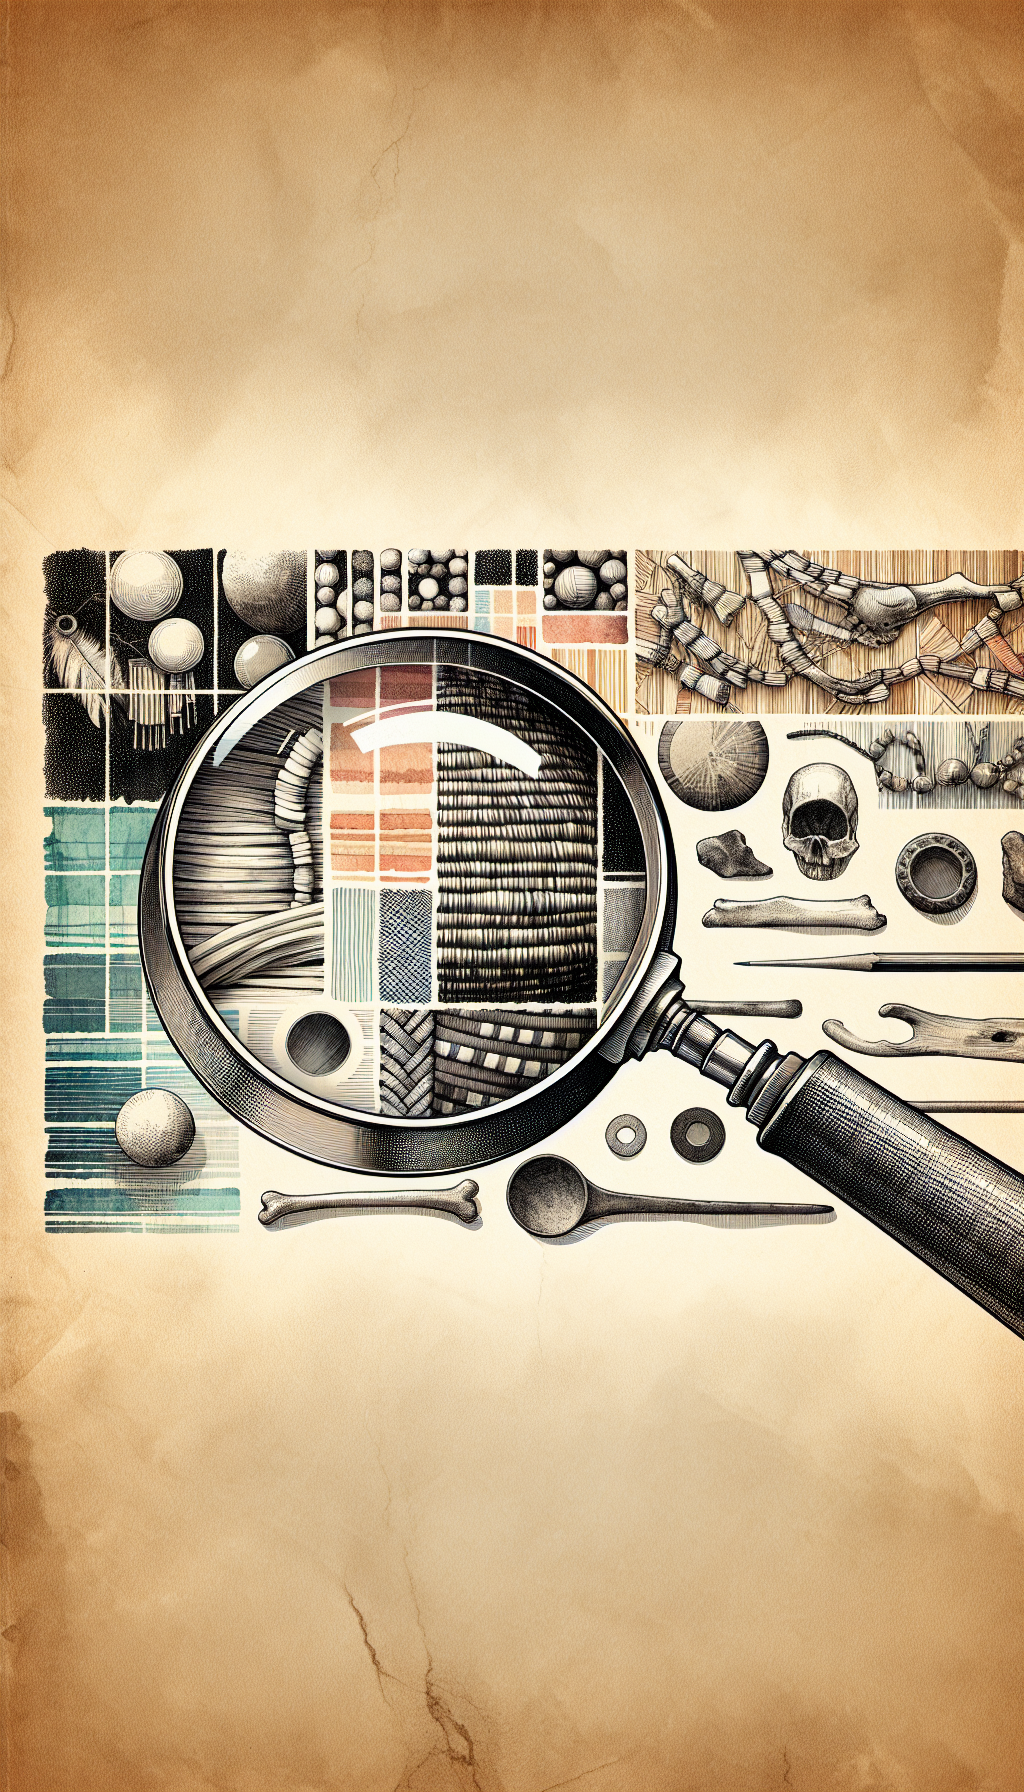 An intricate illustration fuses a segmented backdrop, each part flaunting a distinct art style—a watercolor wash for delicate beads, charcoal shading for ancient bones, and woven textures for native baskets. At the forefront, a magnifying glass hovers, its lens revealing a detailed cross-section of the artifacts, symbolizing the meticulous identification process of Native American cultural treasures.